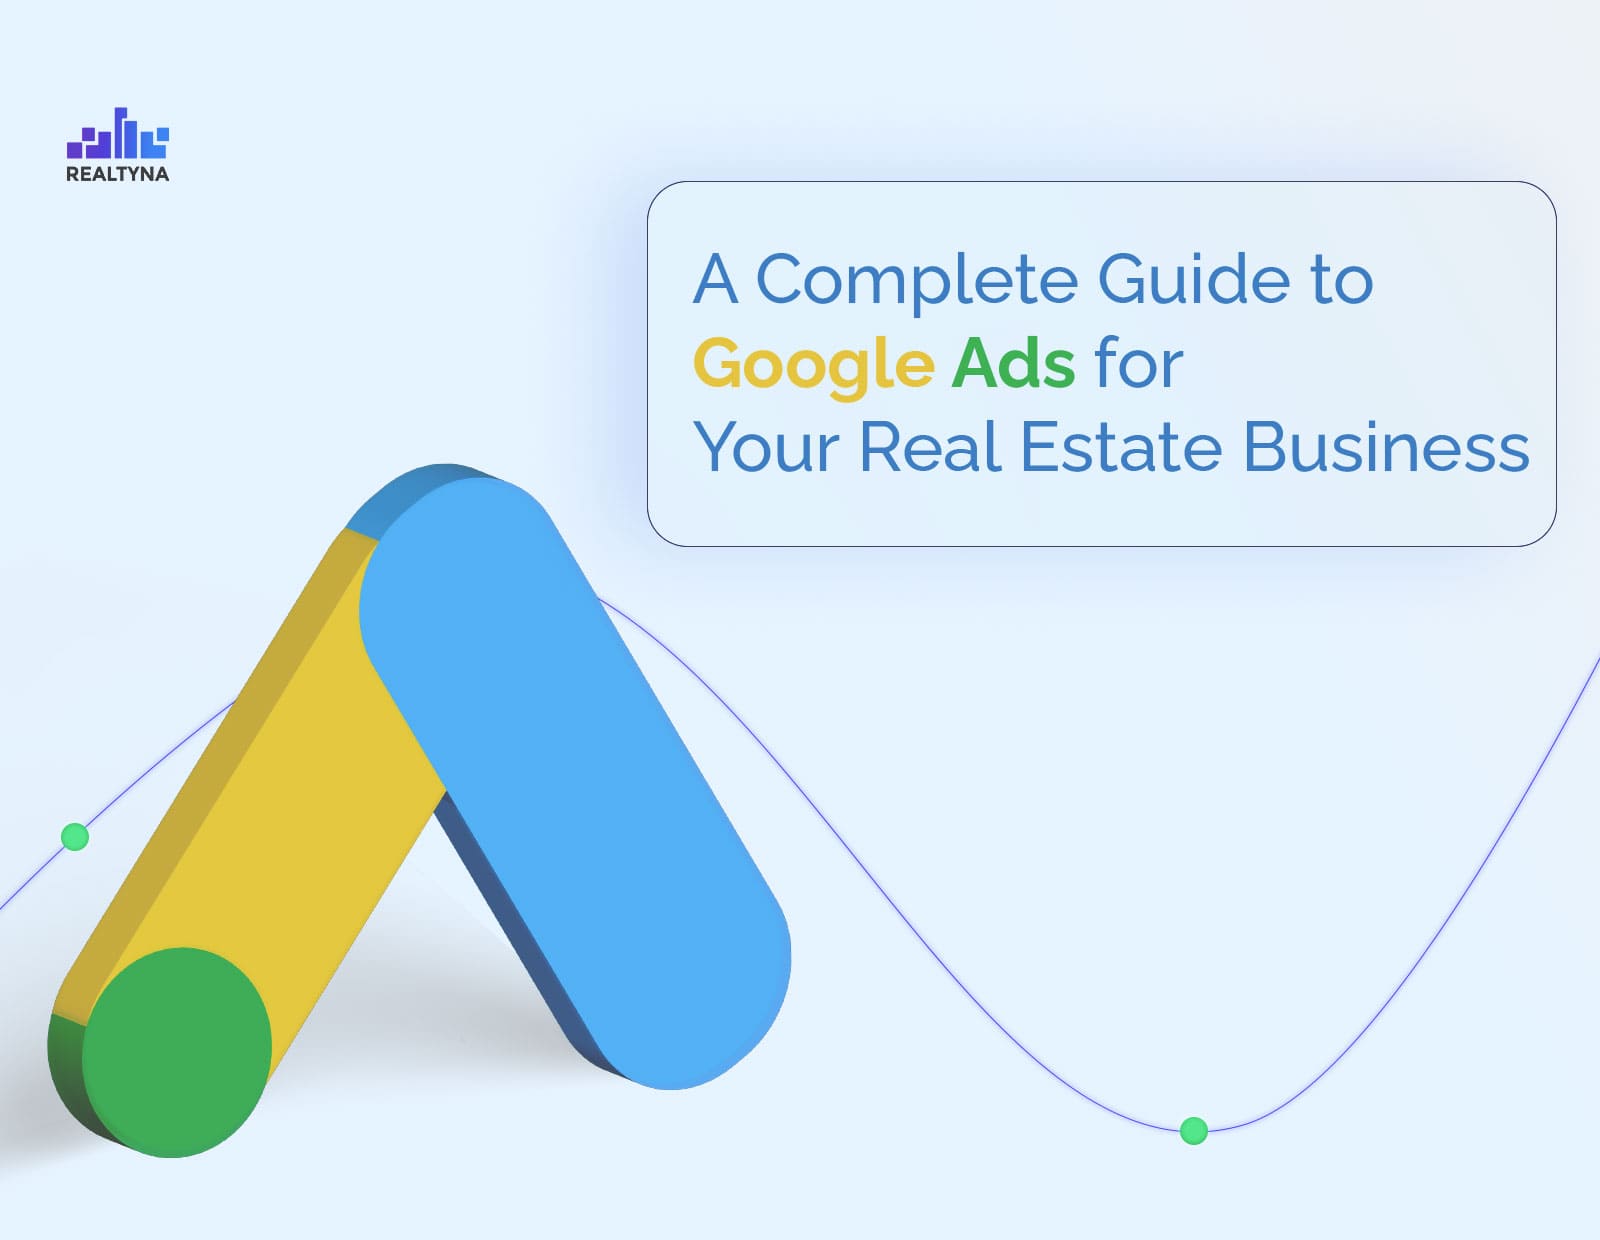 Google Ads for real estate agents